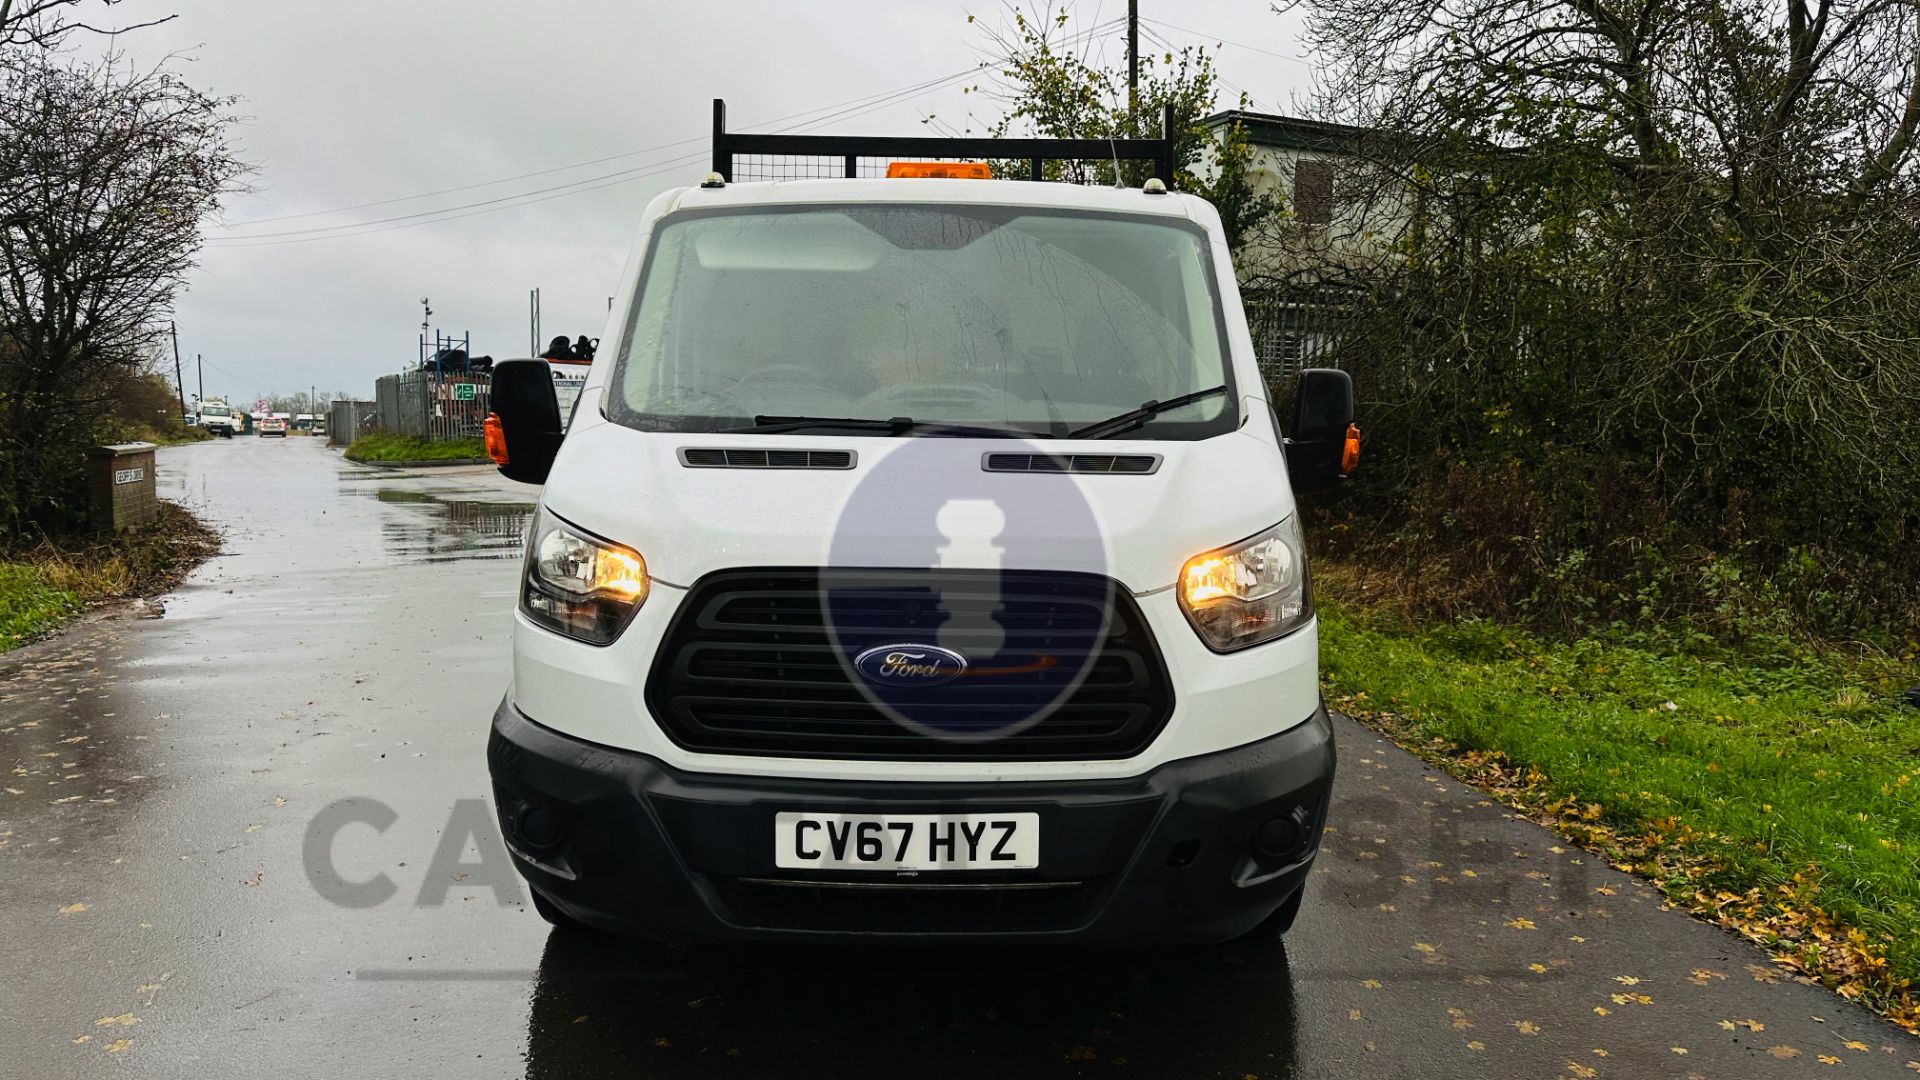 (ON SALE) FORD TRANSIT 130 T350 *LWB - UTILITY CAB TIPPER TRUCK* (2018 - EURO 6) 2.0 TDCI (3500 KG) - Image 4 of 34